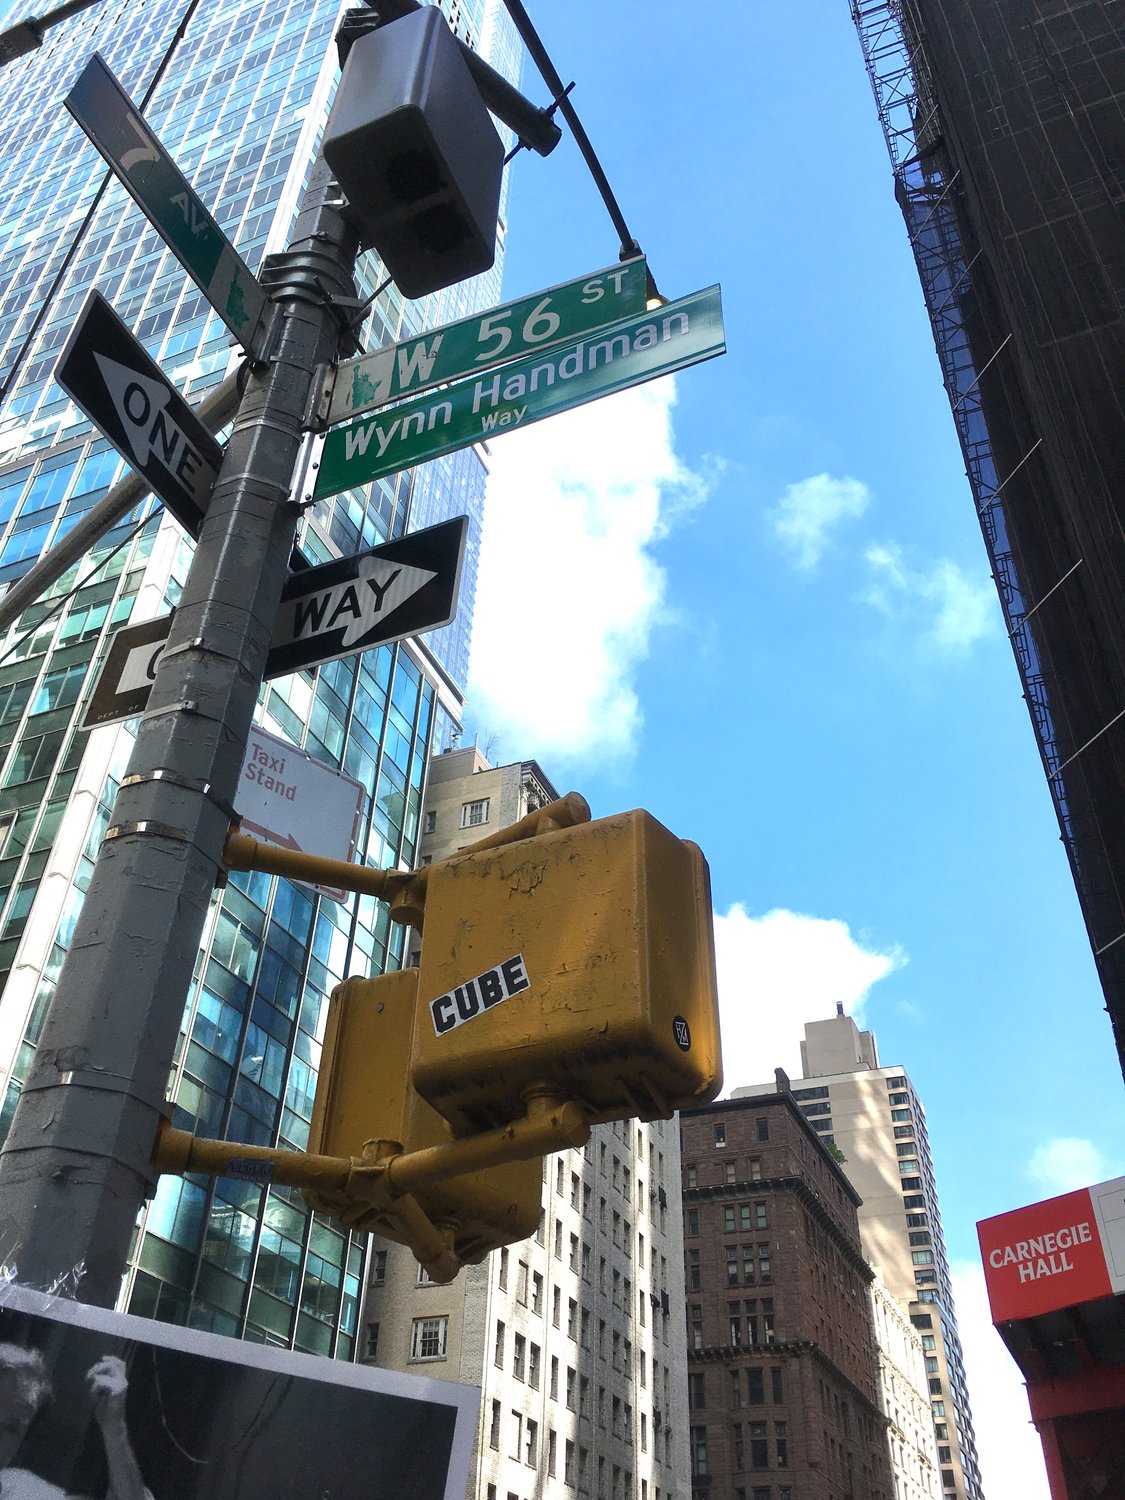 West 56th Street near Carnegie Hall was named in honor of the late Wynn Handman Sept. 12.